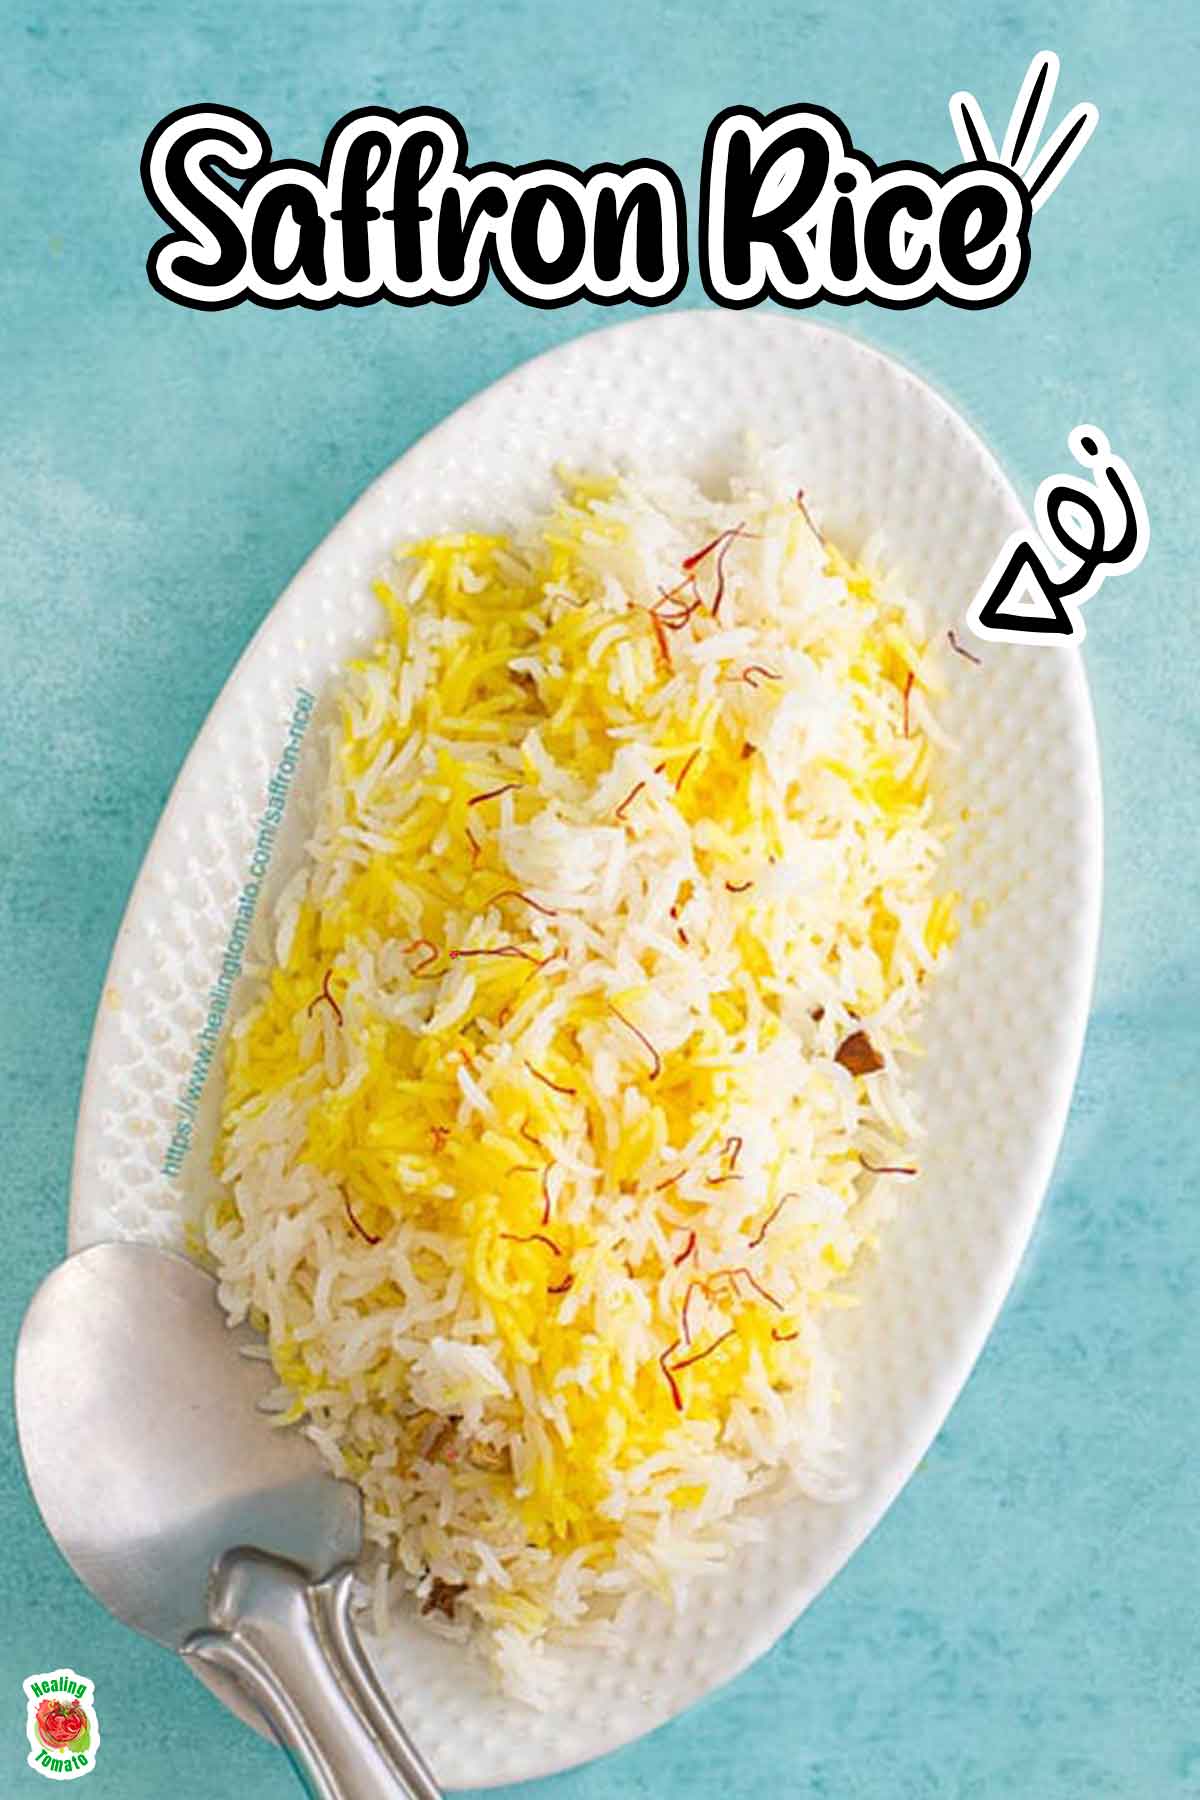 Top view of yellow saffron rice on a white plate. Placed on a sky blue background